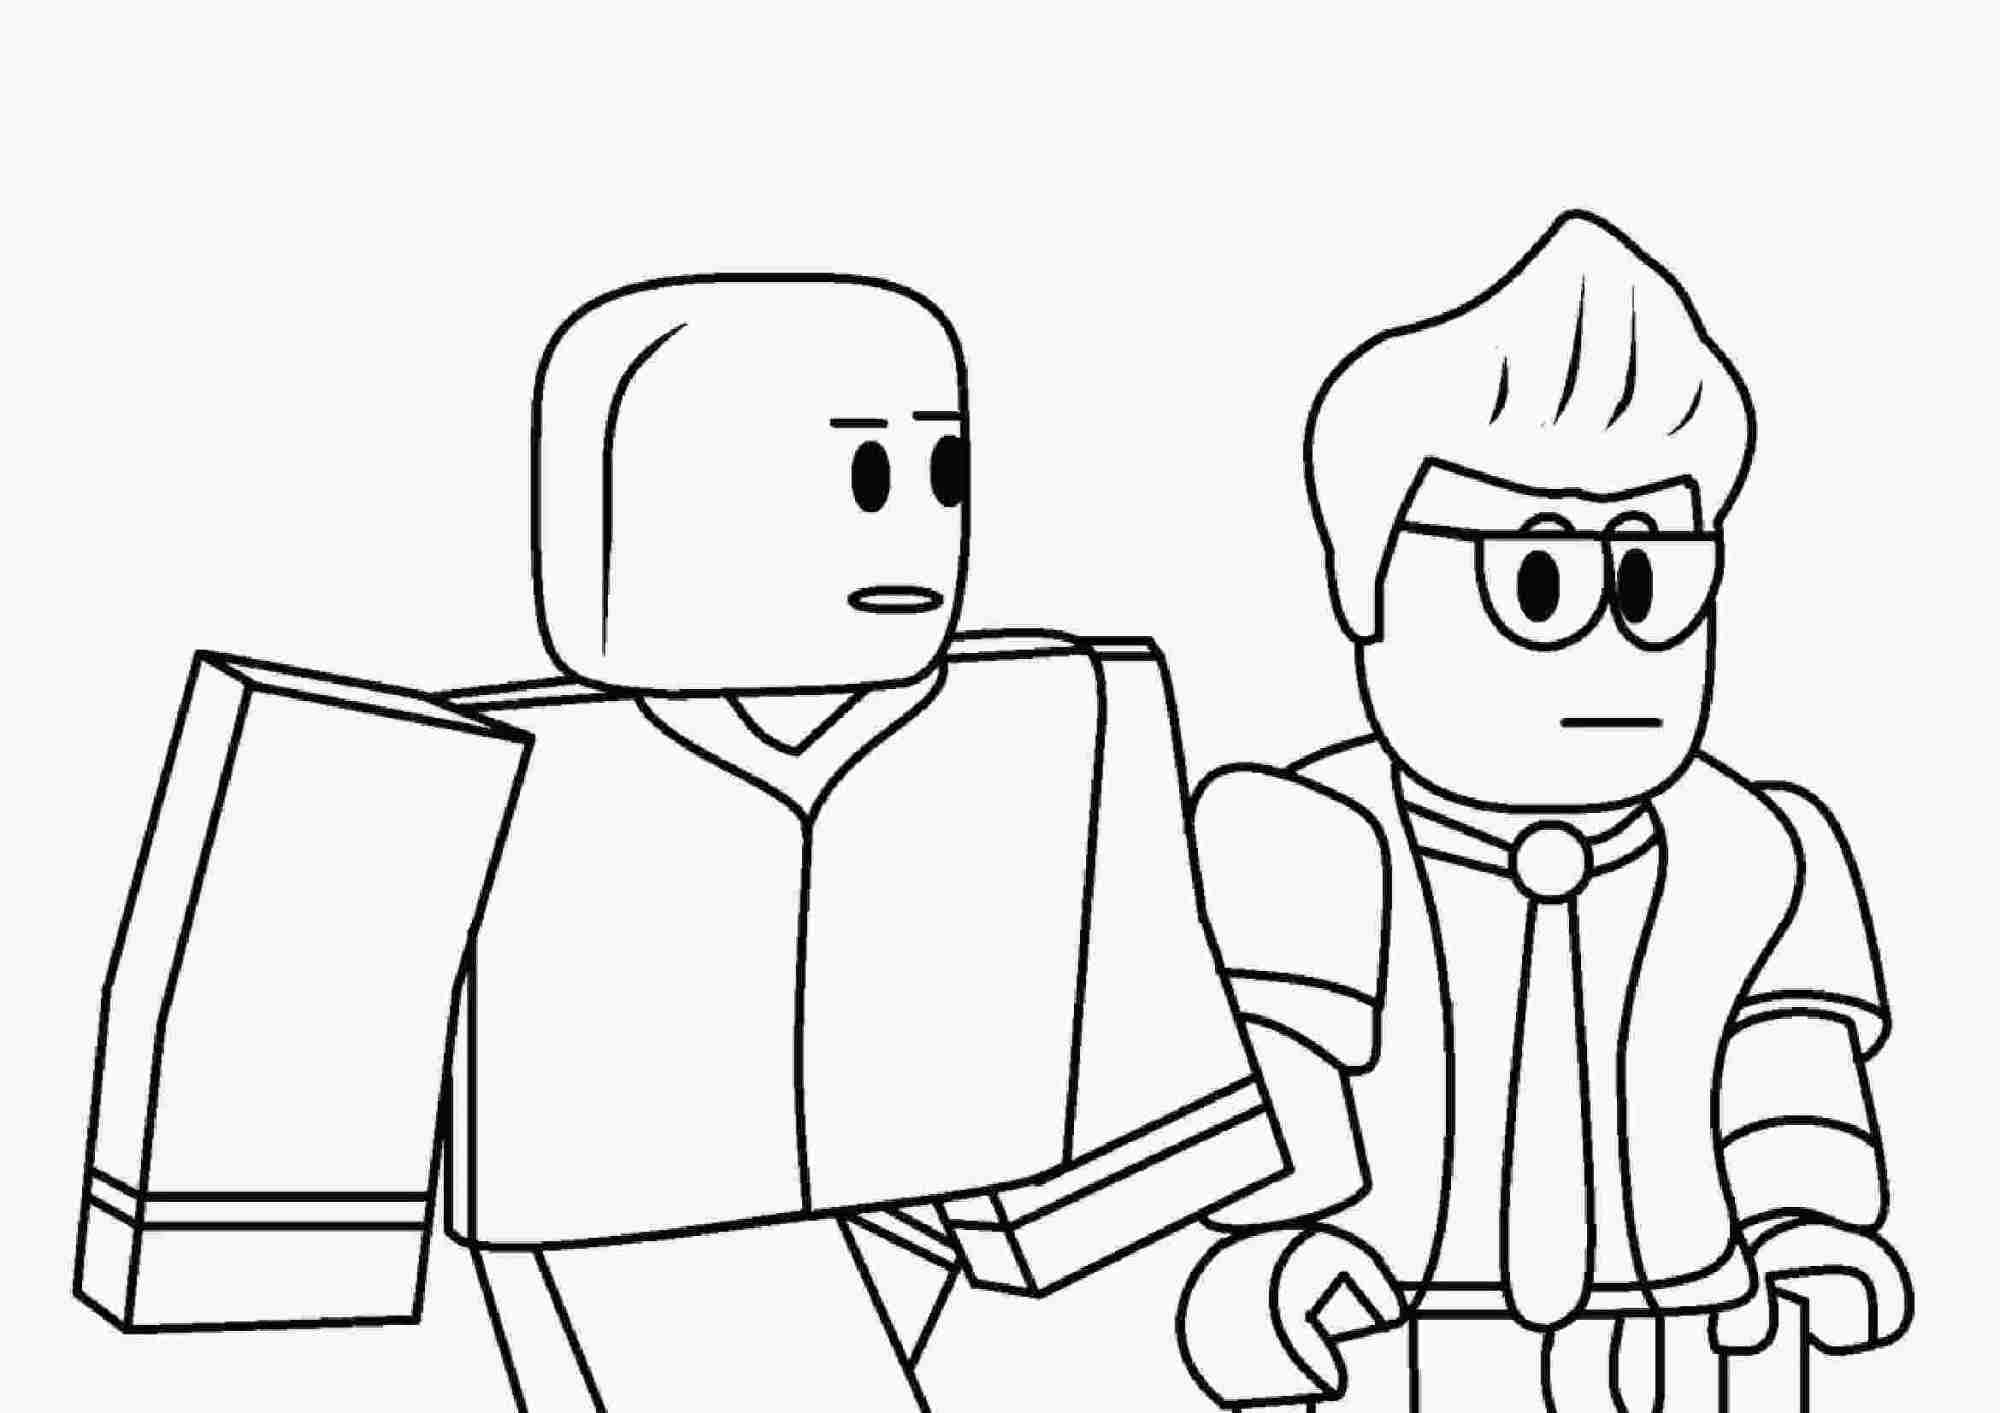 Roblox Noob And Businessman Walk Around Coloring Pages Lego Coloring Pages Coloring Pages For Kids And Adults - zombie walk roblox